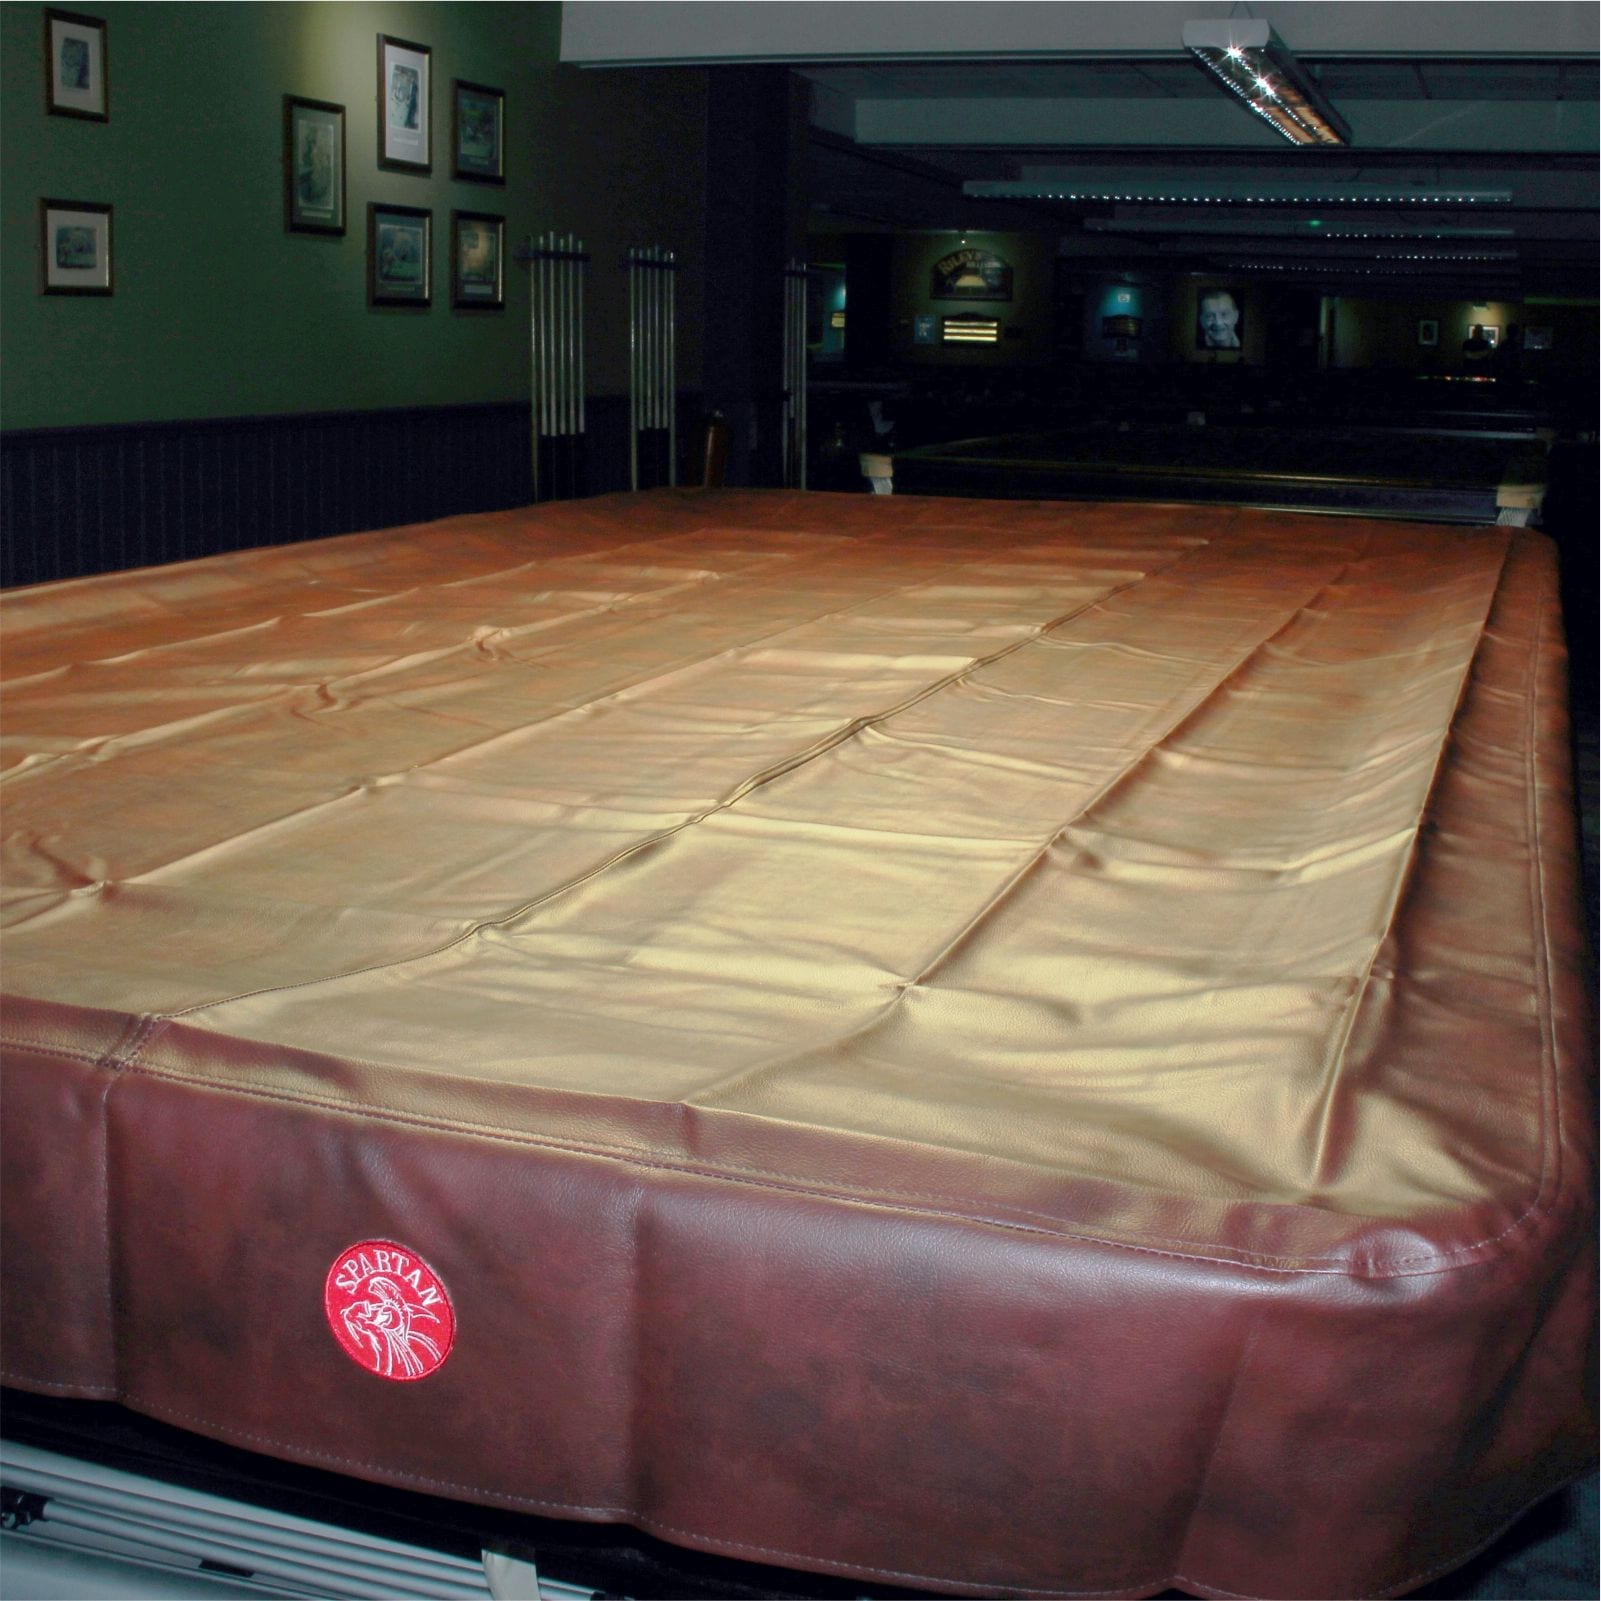 SPARTAN Heavy Duty Water Resistant Snooker Table Cover - 10FT BURGUNDY